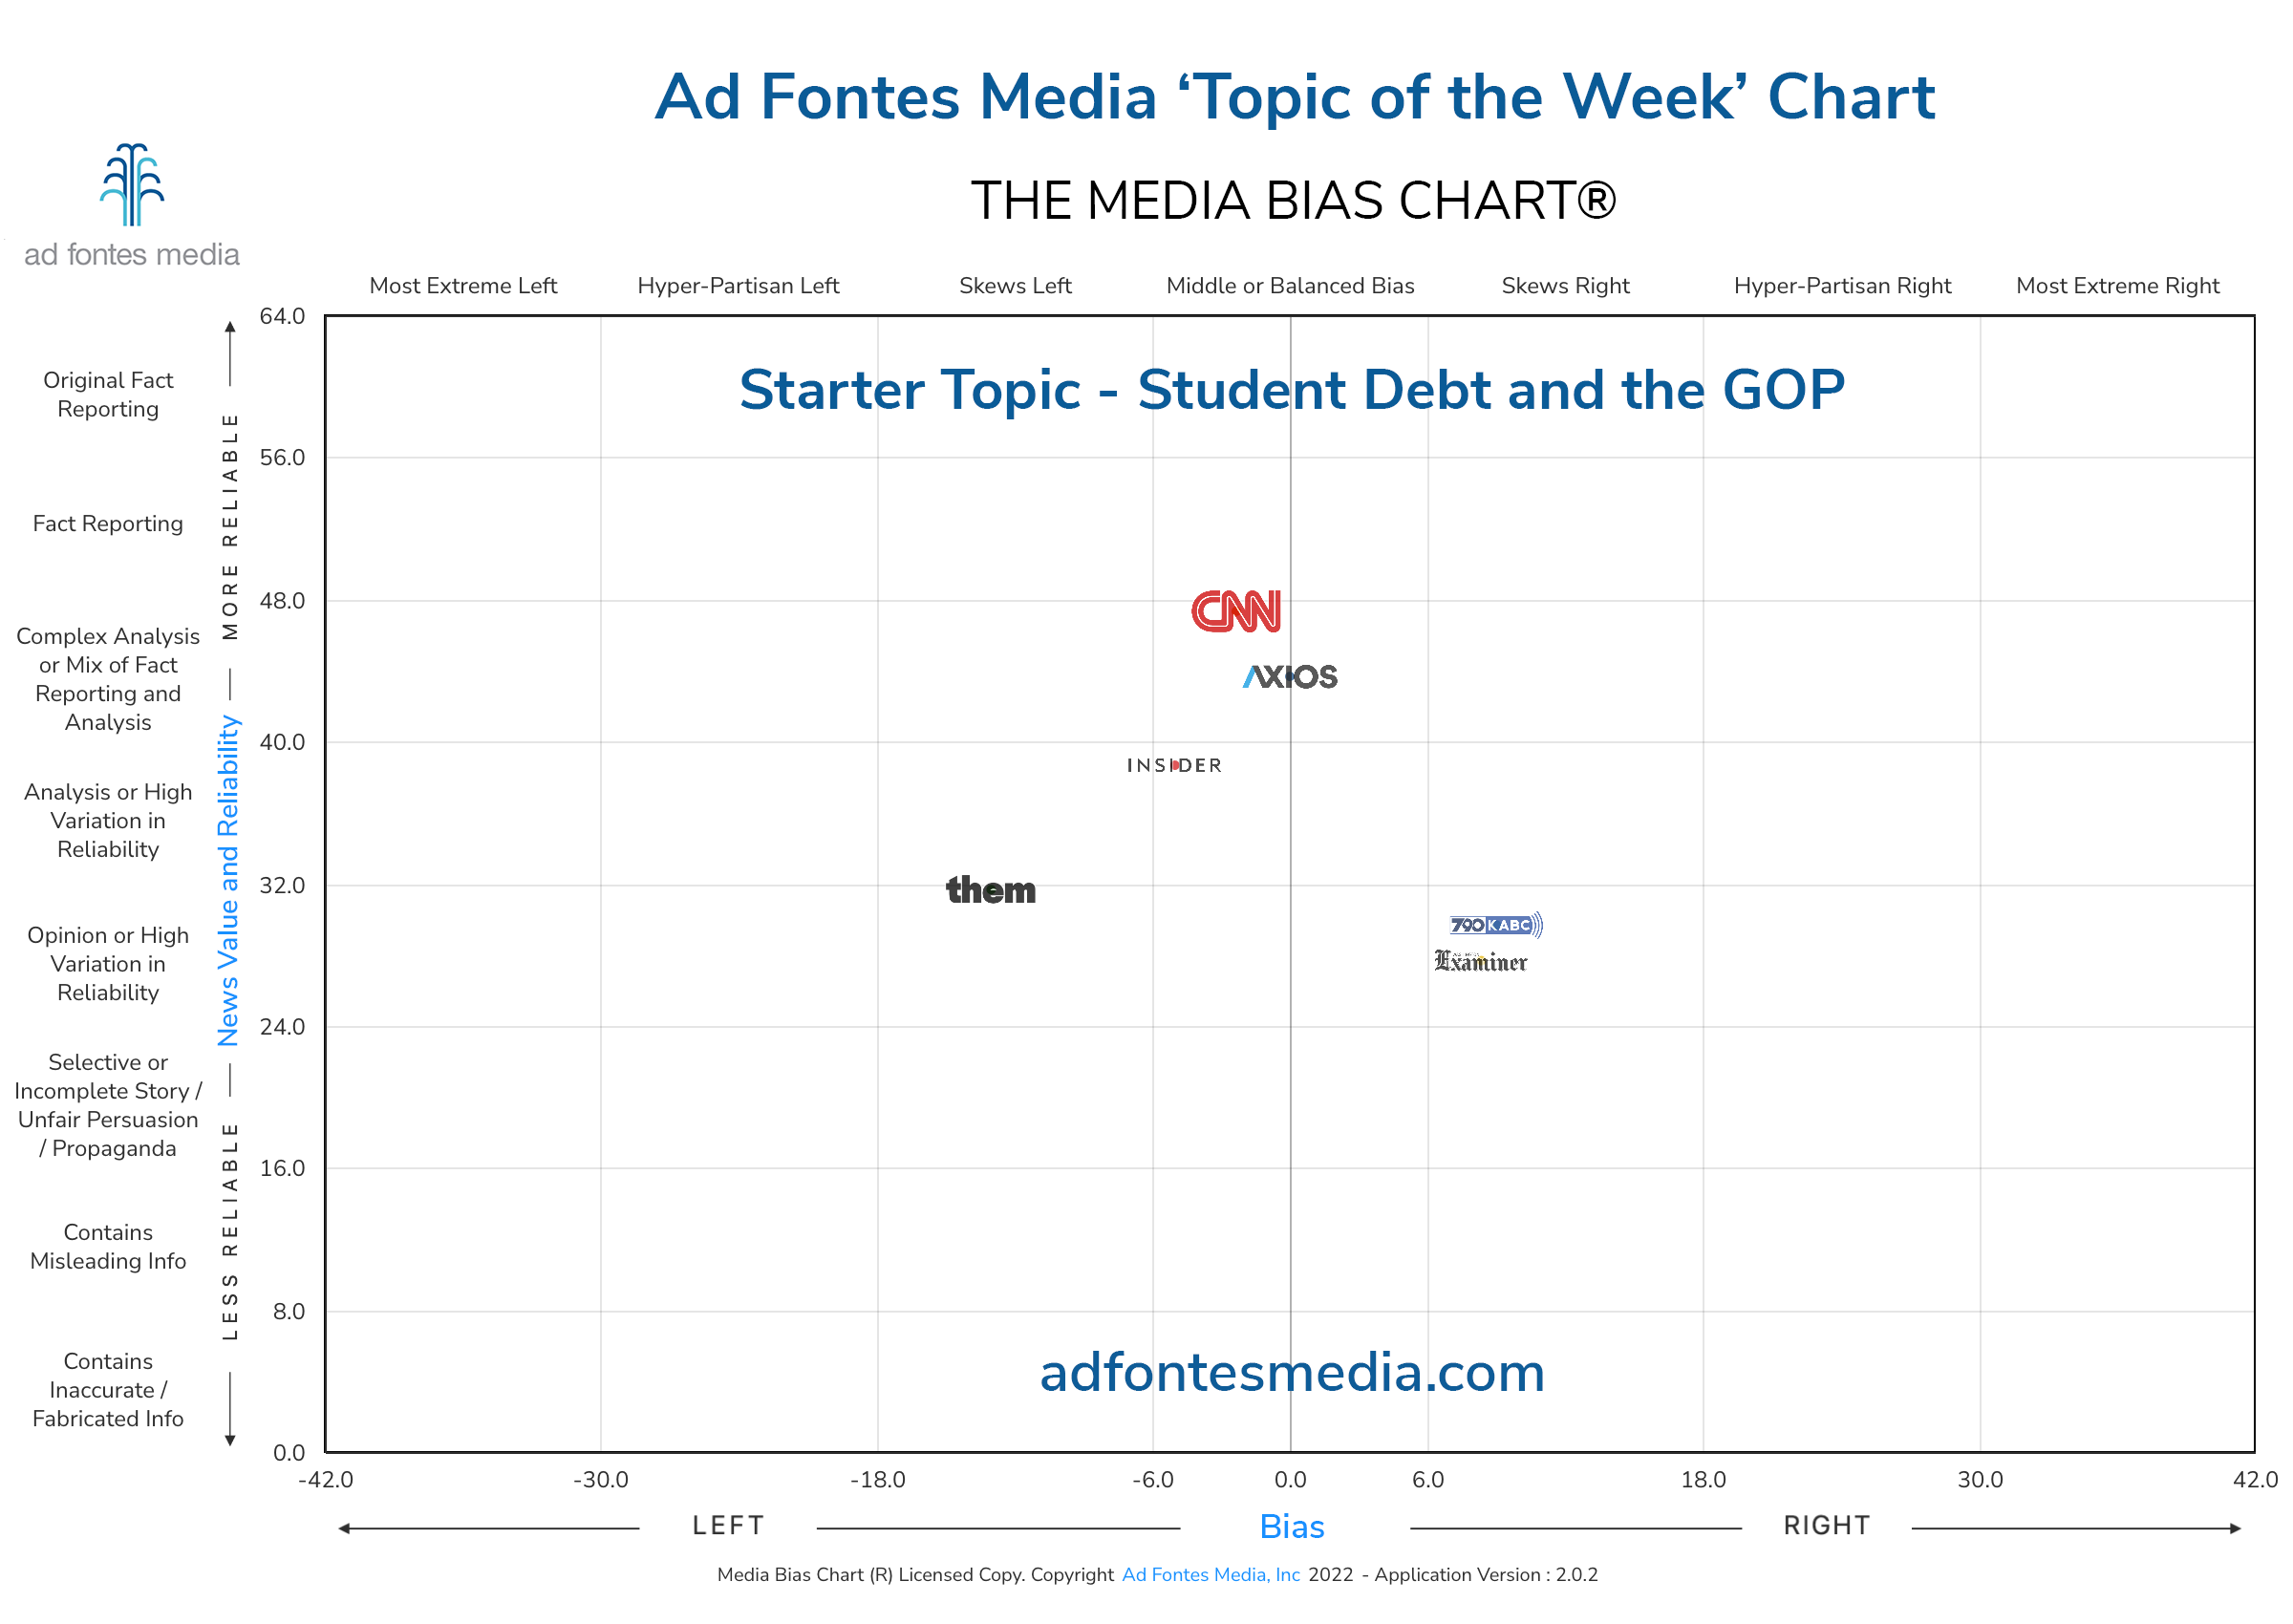 Scores of the Student Debt and the GOP articles on the chart